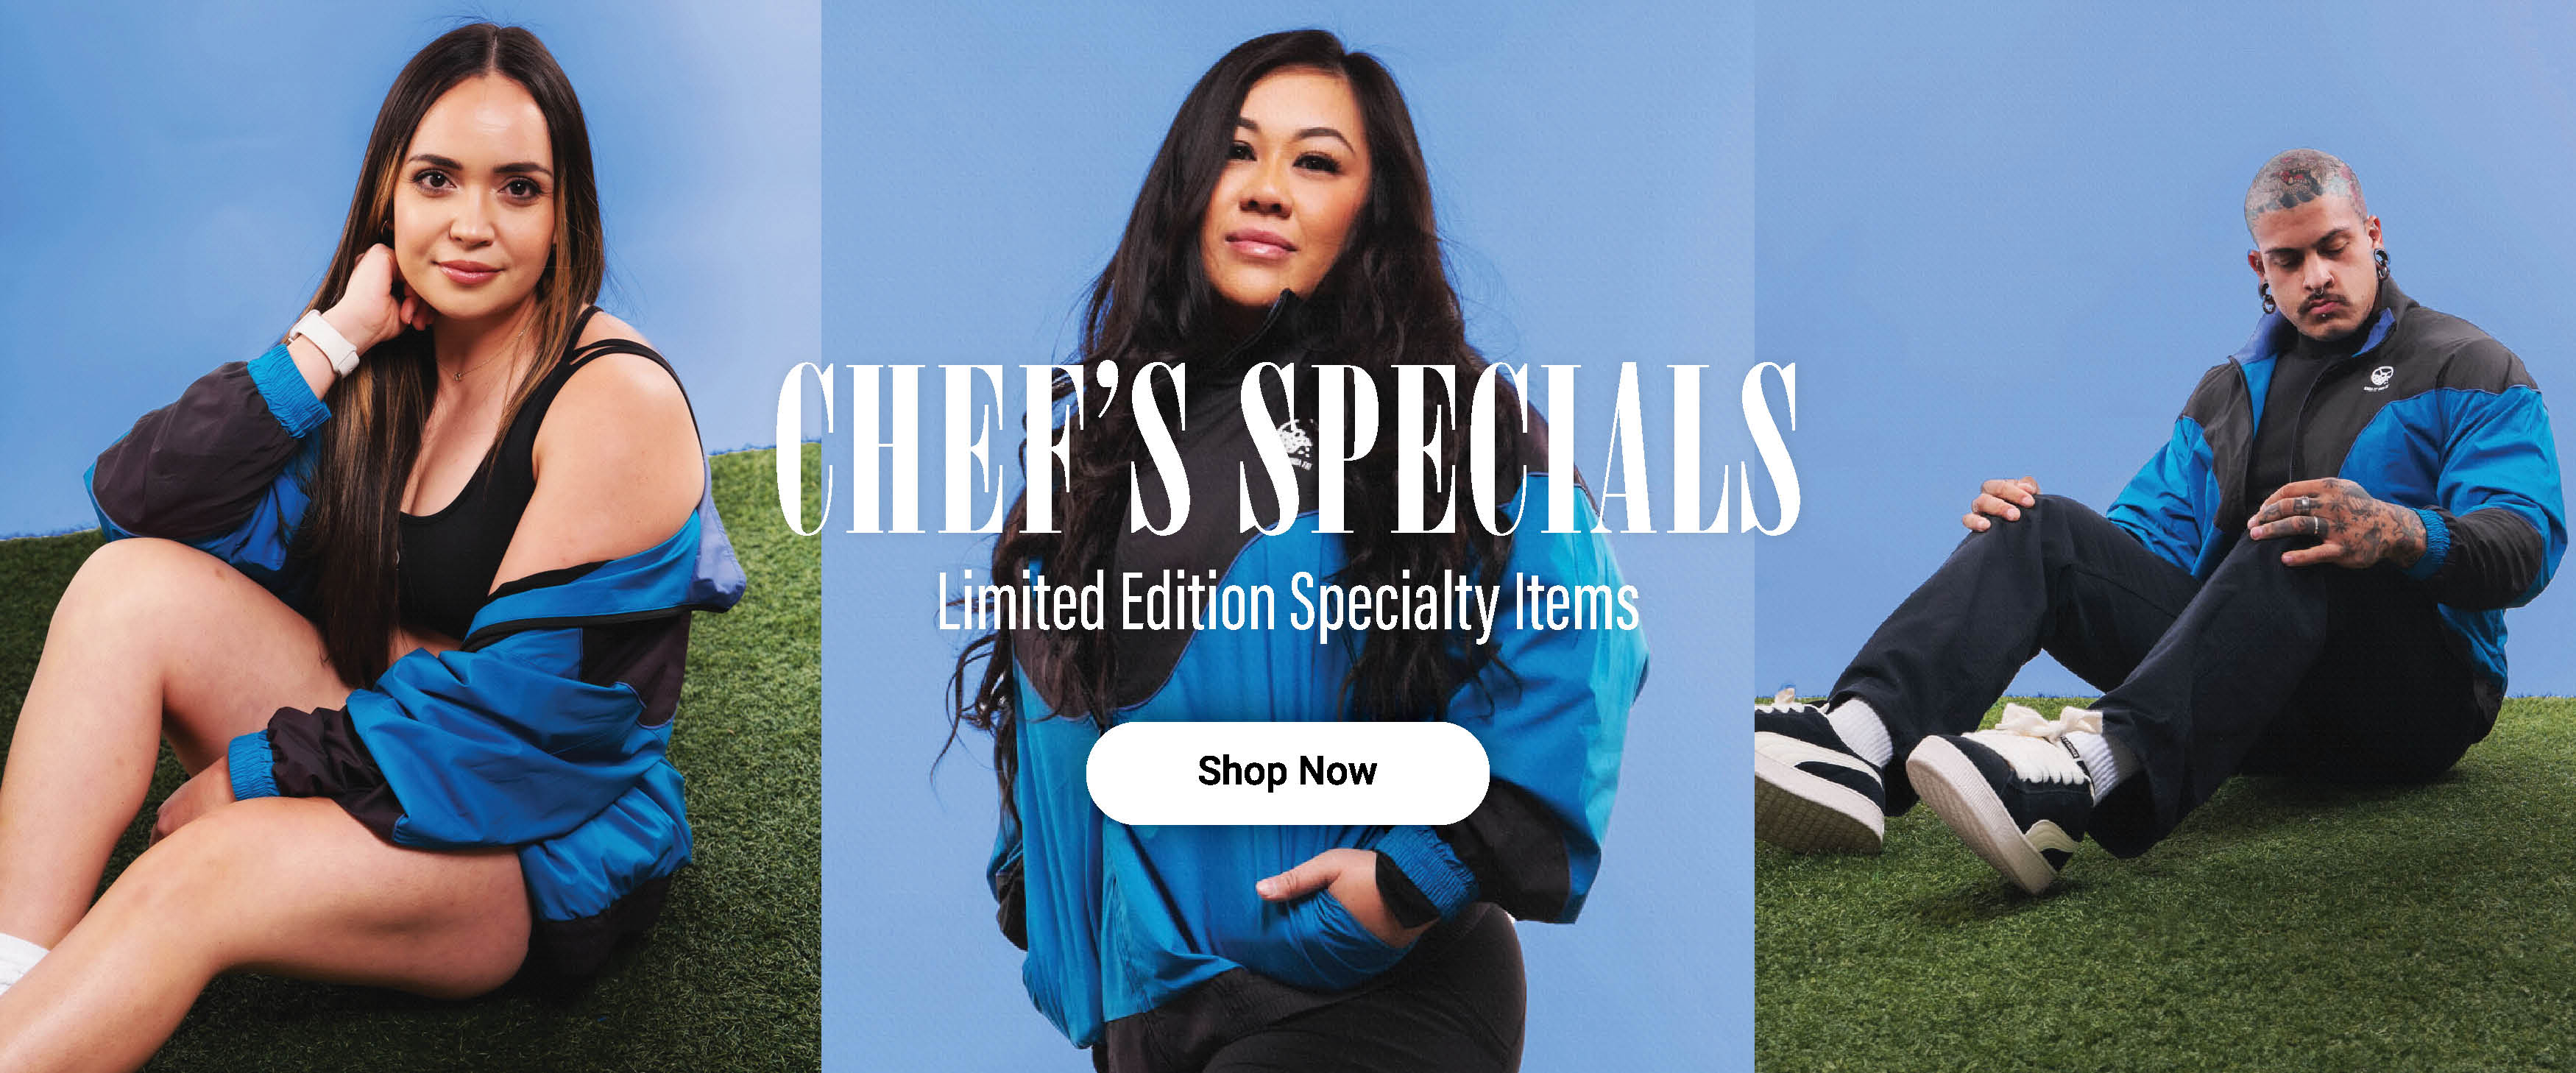 chef specials available in a track jacket, dog hoodie, coach's jacket, seaweed inspired designs, and anorak - shop now